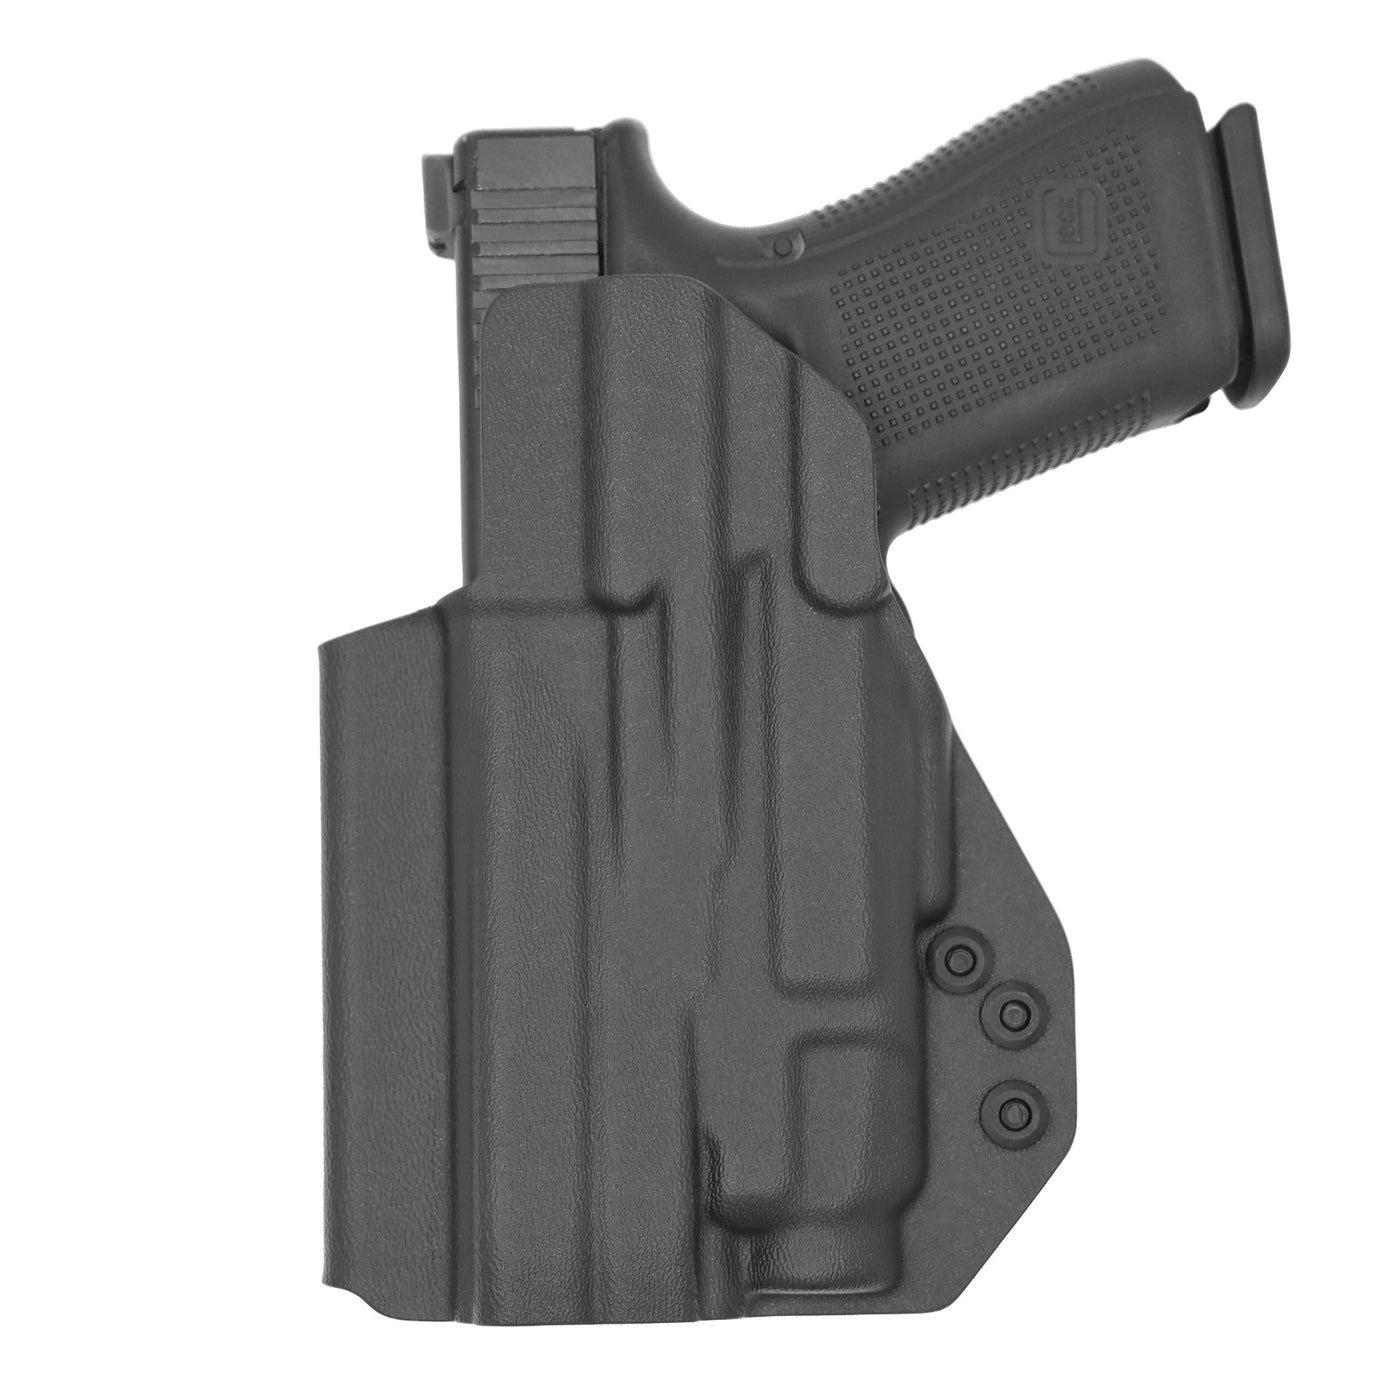 C&G Holsters custom IWB Tactical OZ9/c streamlight tlr7/a in holstered position back view